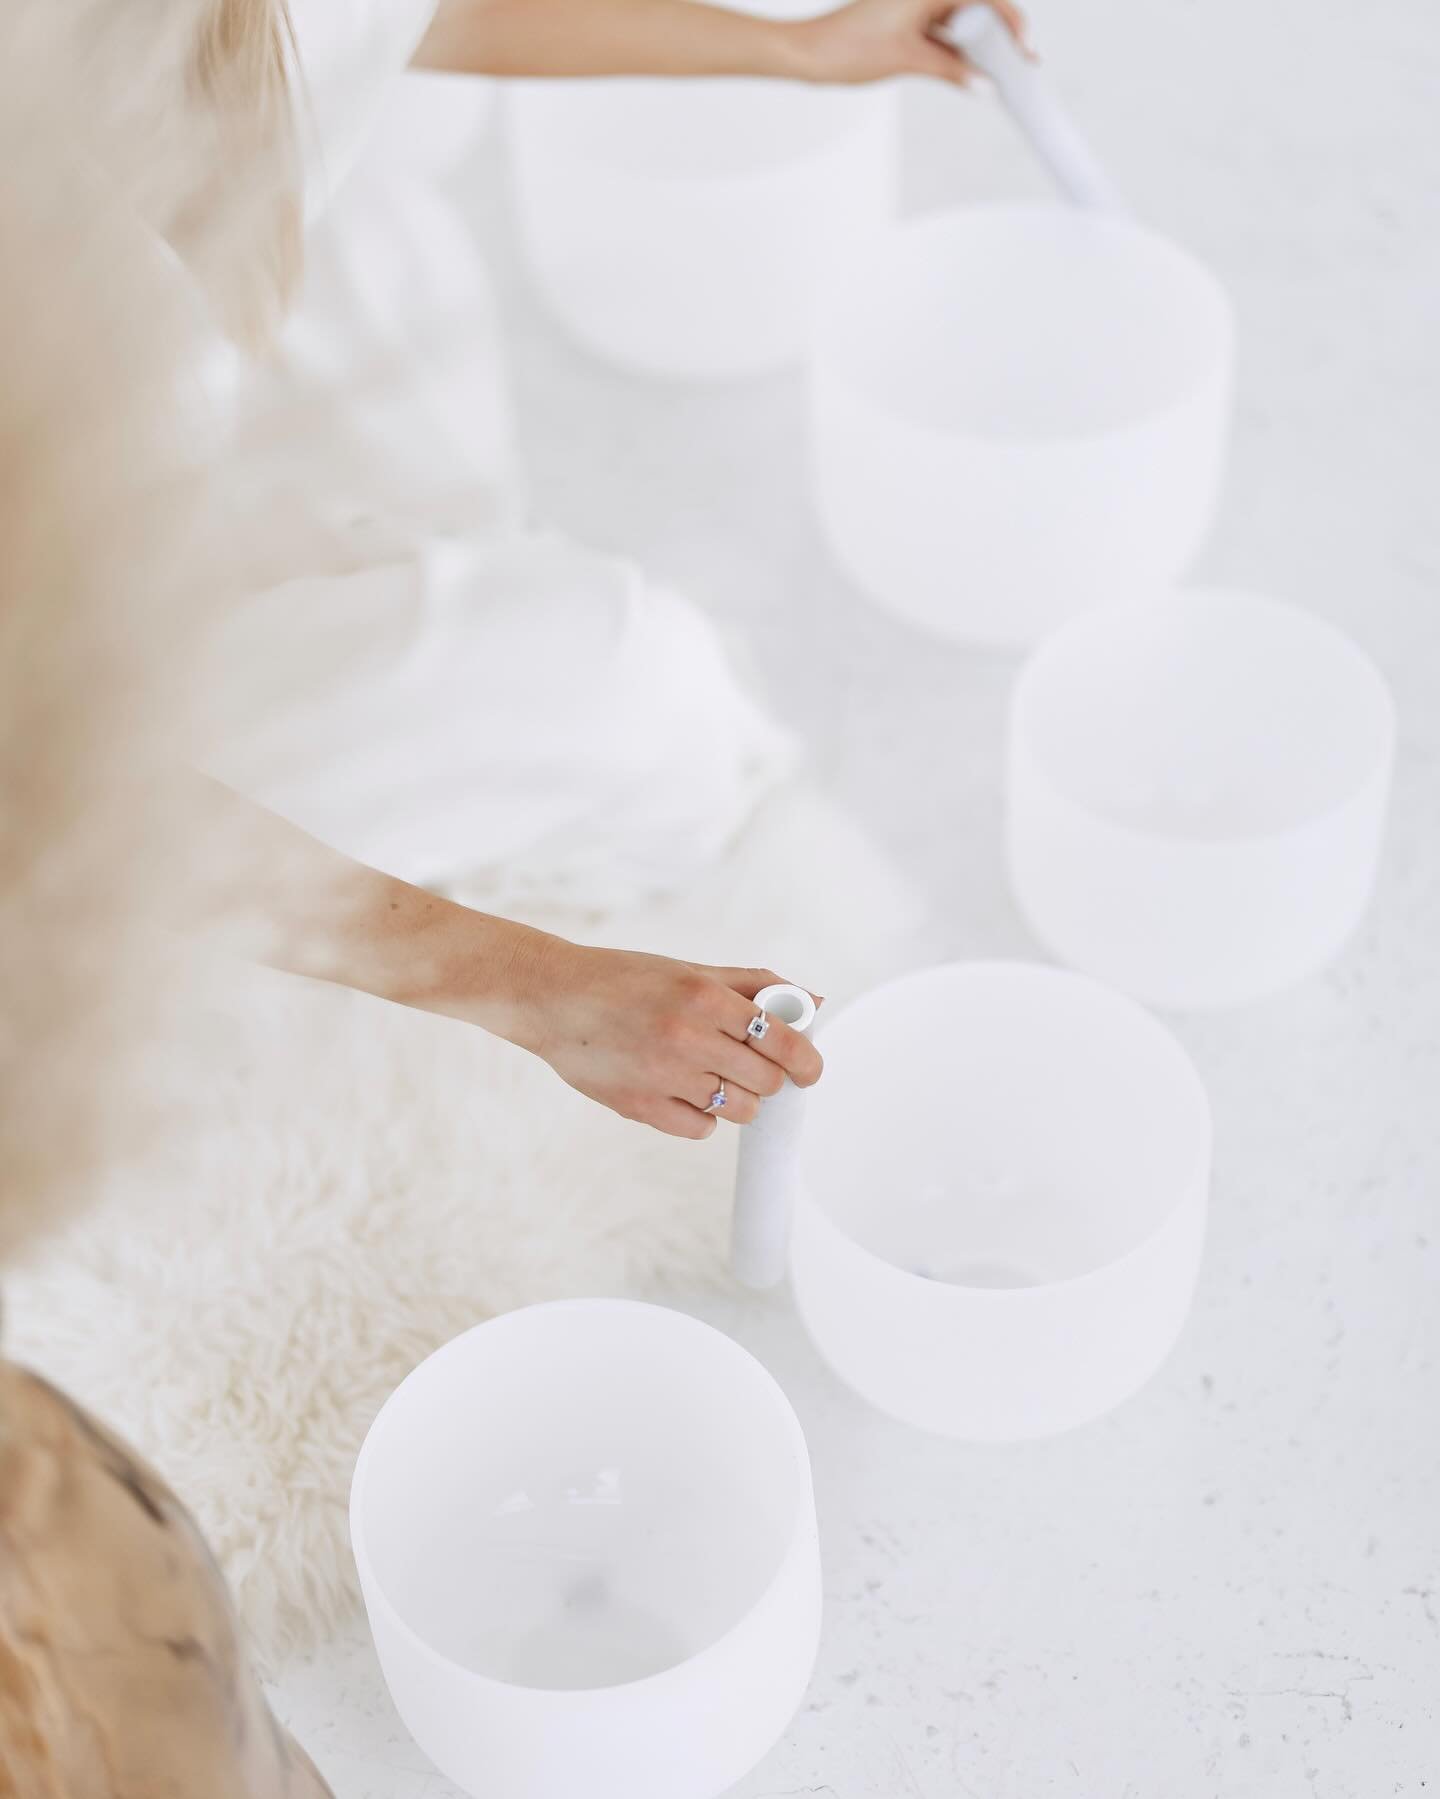 ✨🌟 LAST CHANCE! 🌟✨ 

Transform your sound healing practice with this stunning 7-piece 432Hz Chakra Set of Frosted Crystal Singing Bowls! 🎶 Tomorrow is the LAST DAY to enter our Chakra Set Giveaway!

This special set of singing bowls is tuned to 43